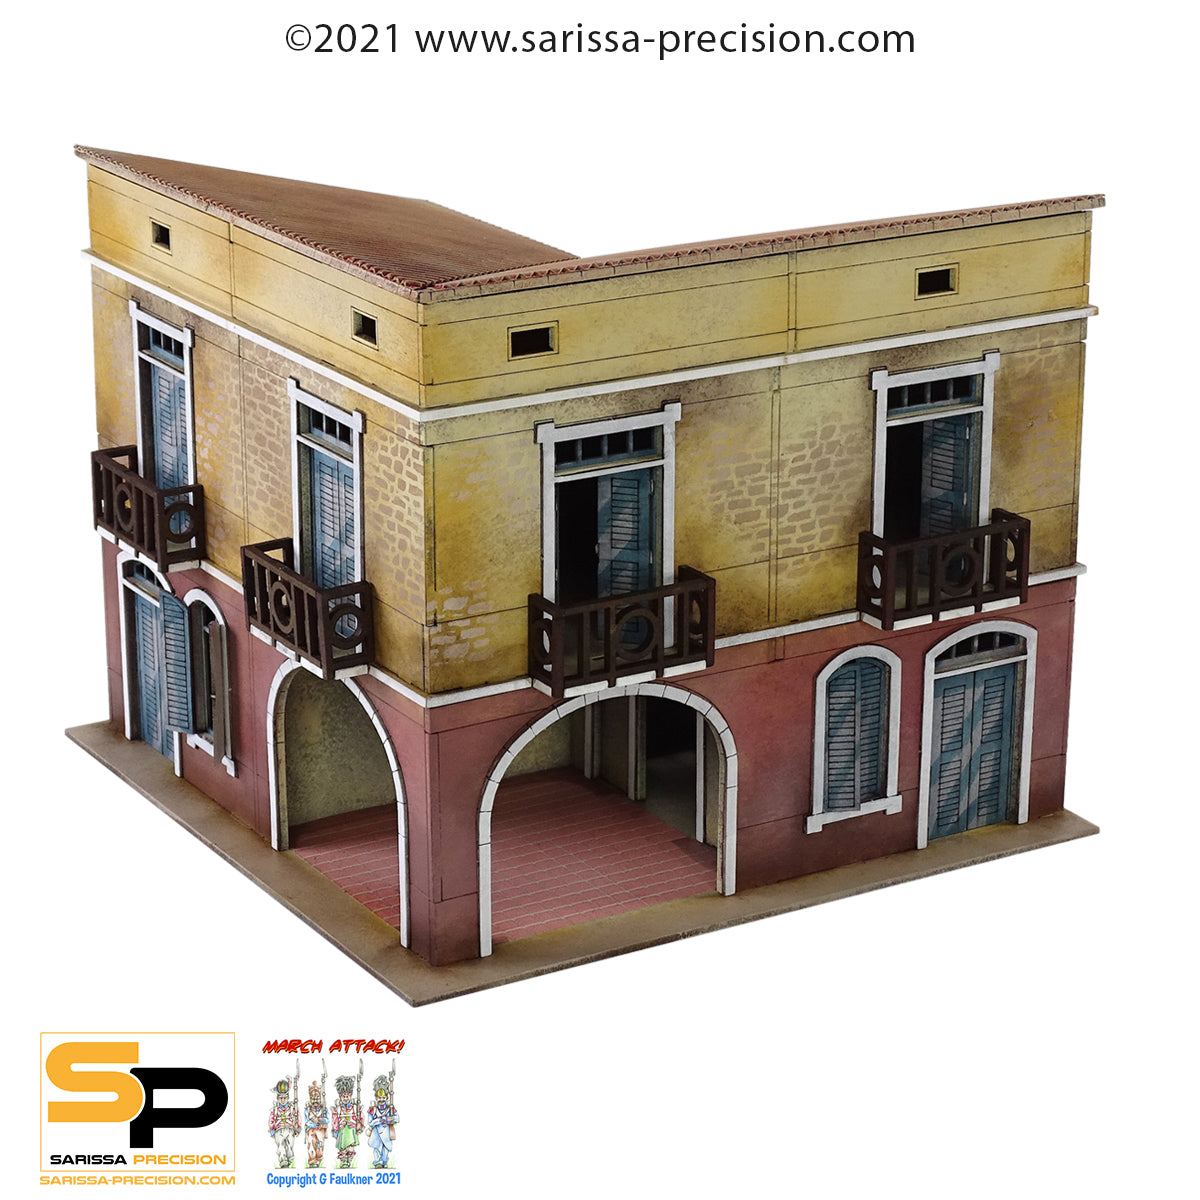 Mediterranean Corner Tavern - 2 Floors with Balcony and Sloped Roof